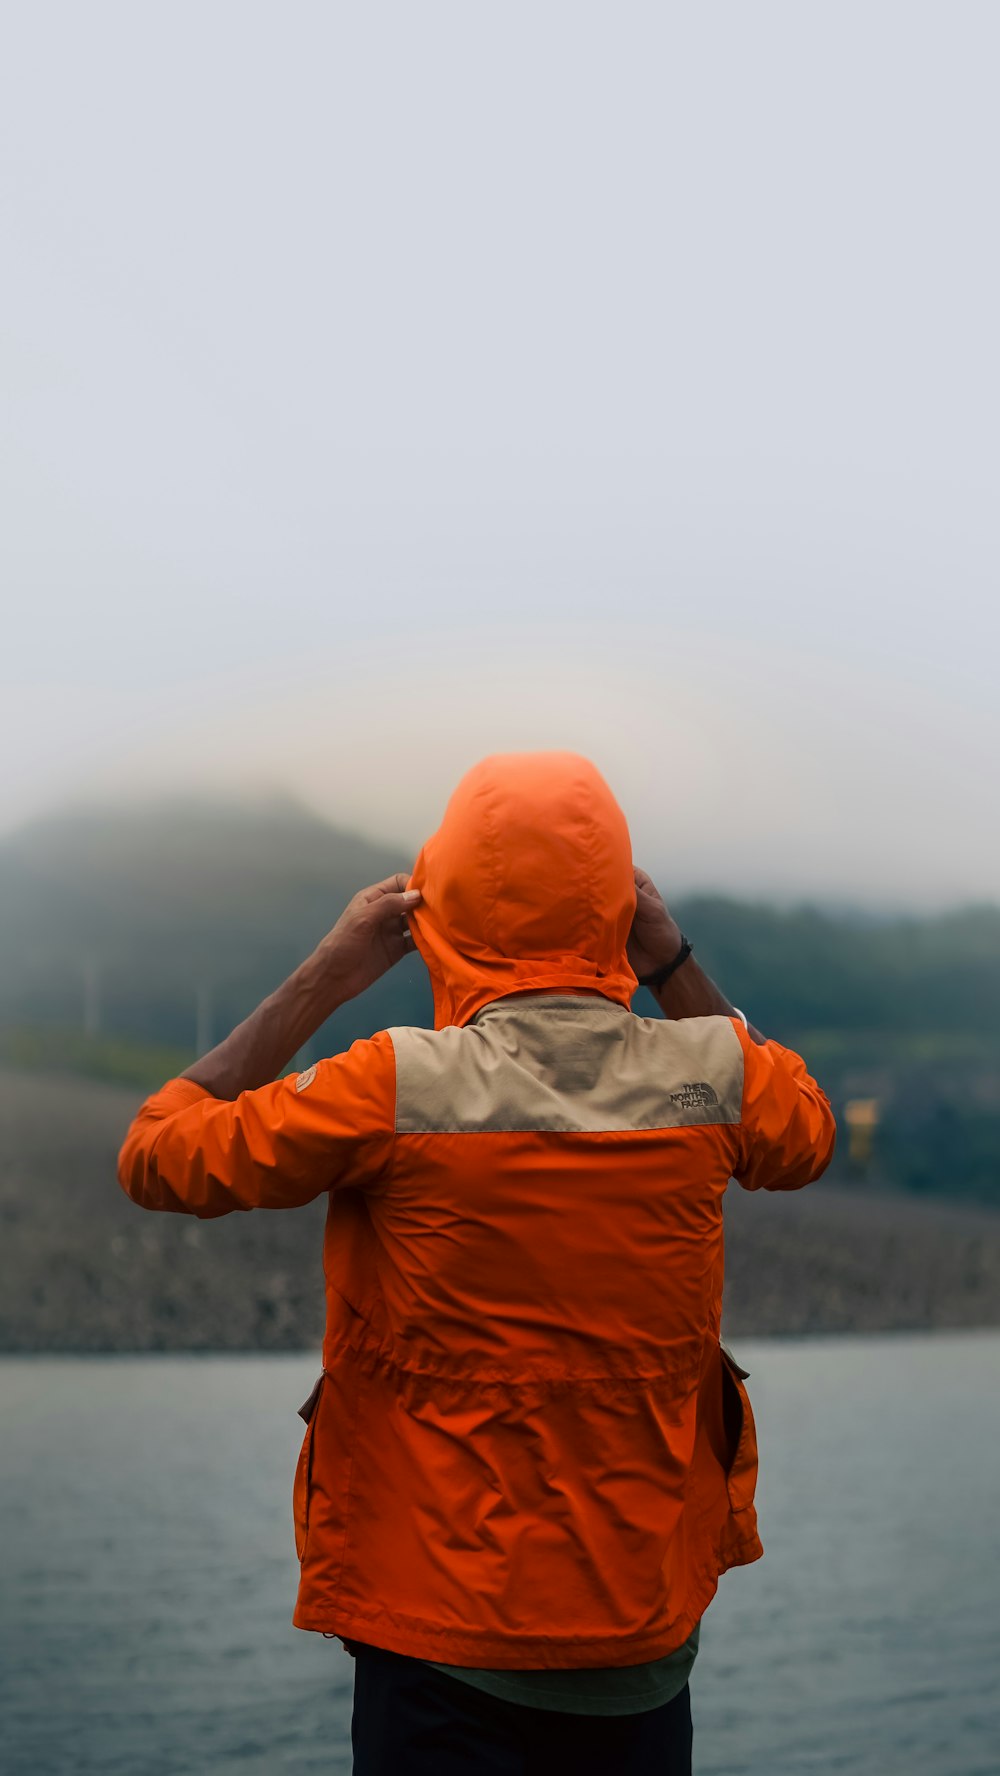 a person in an orange jacket looking out over a body of water